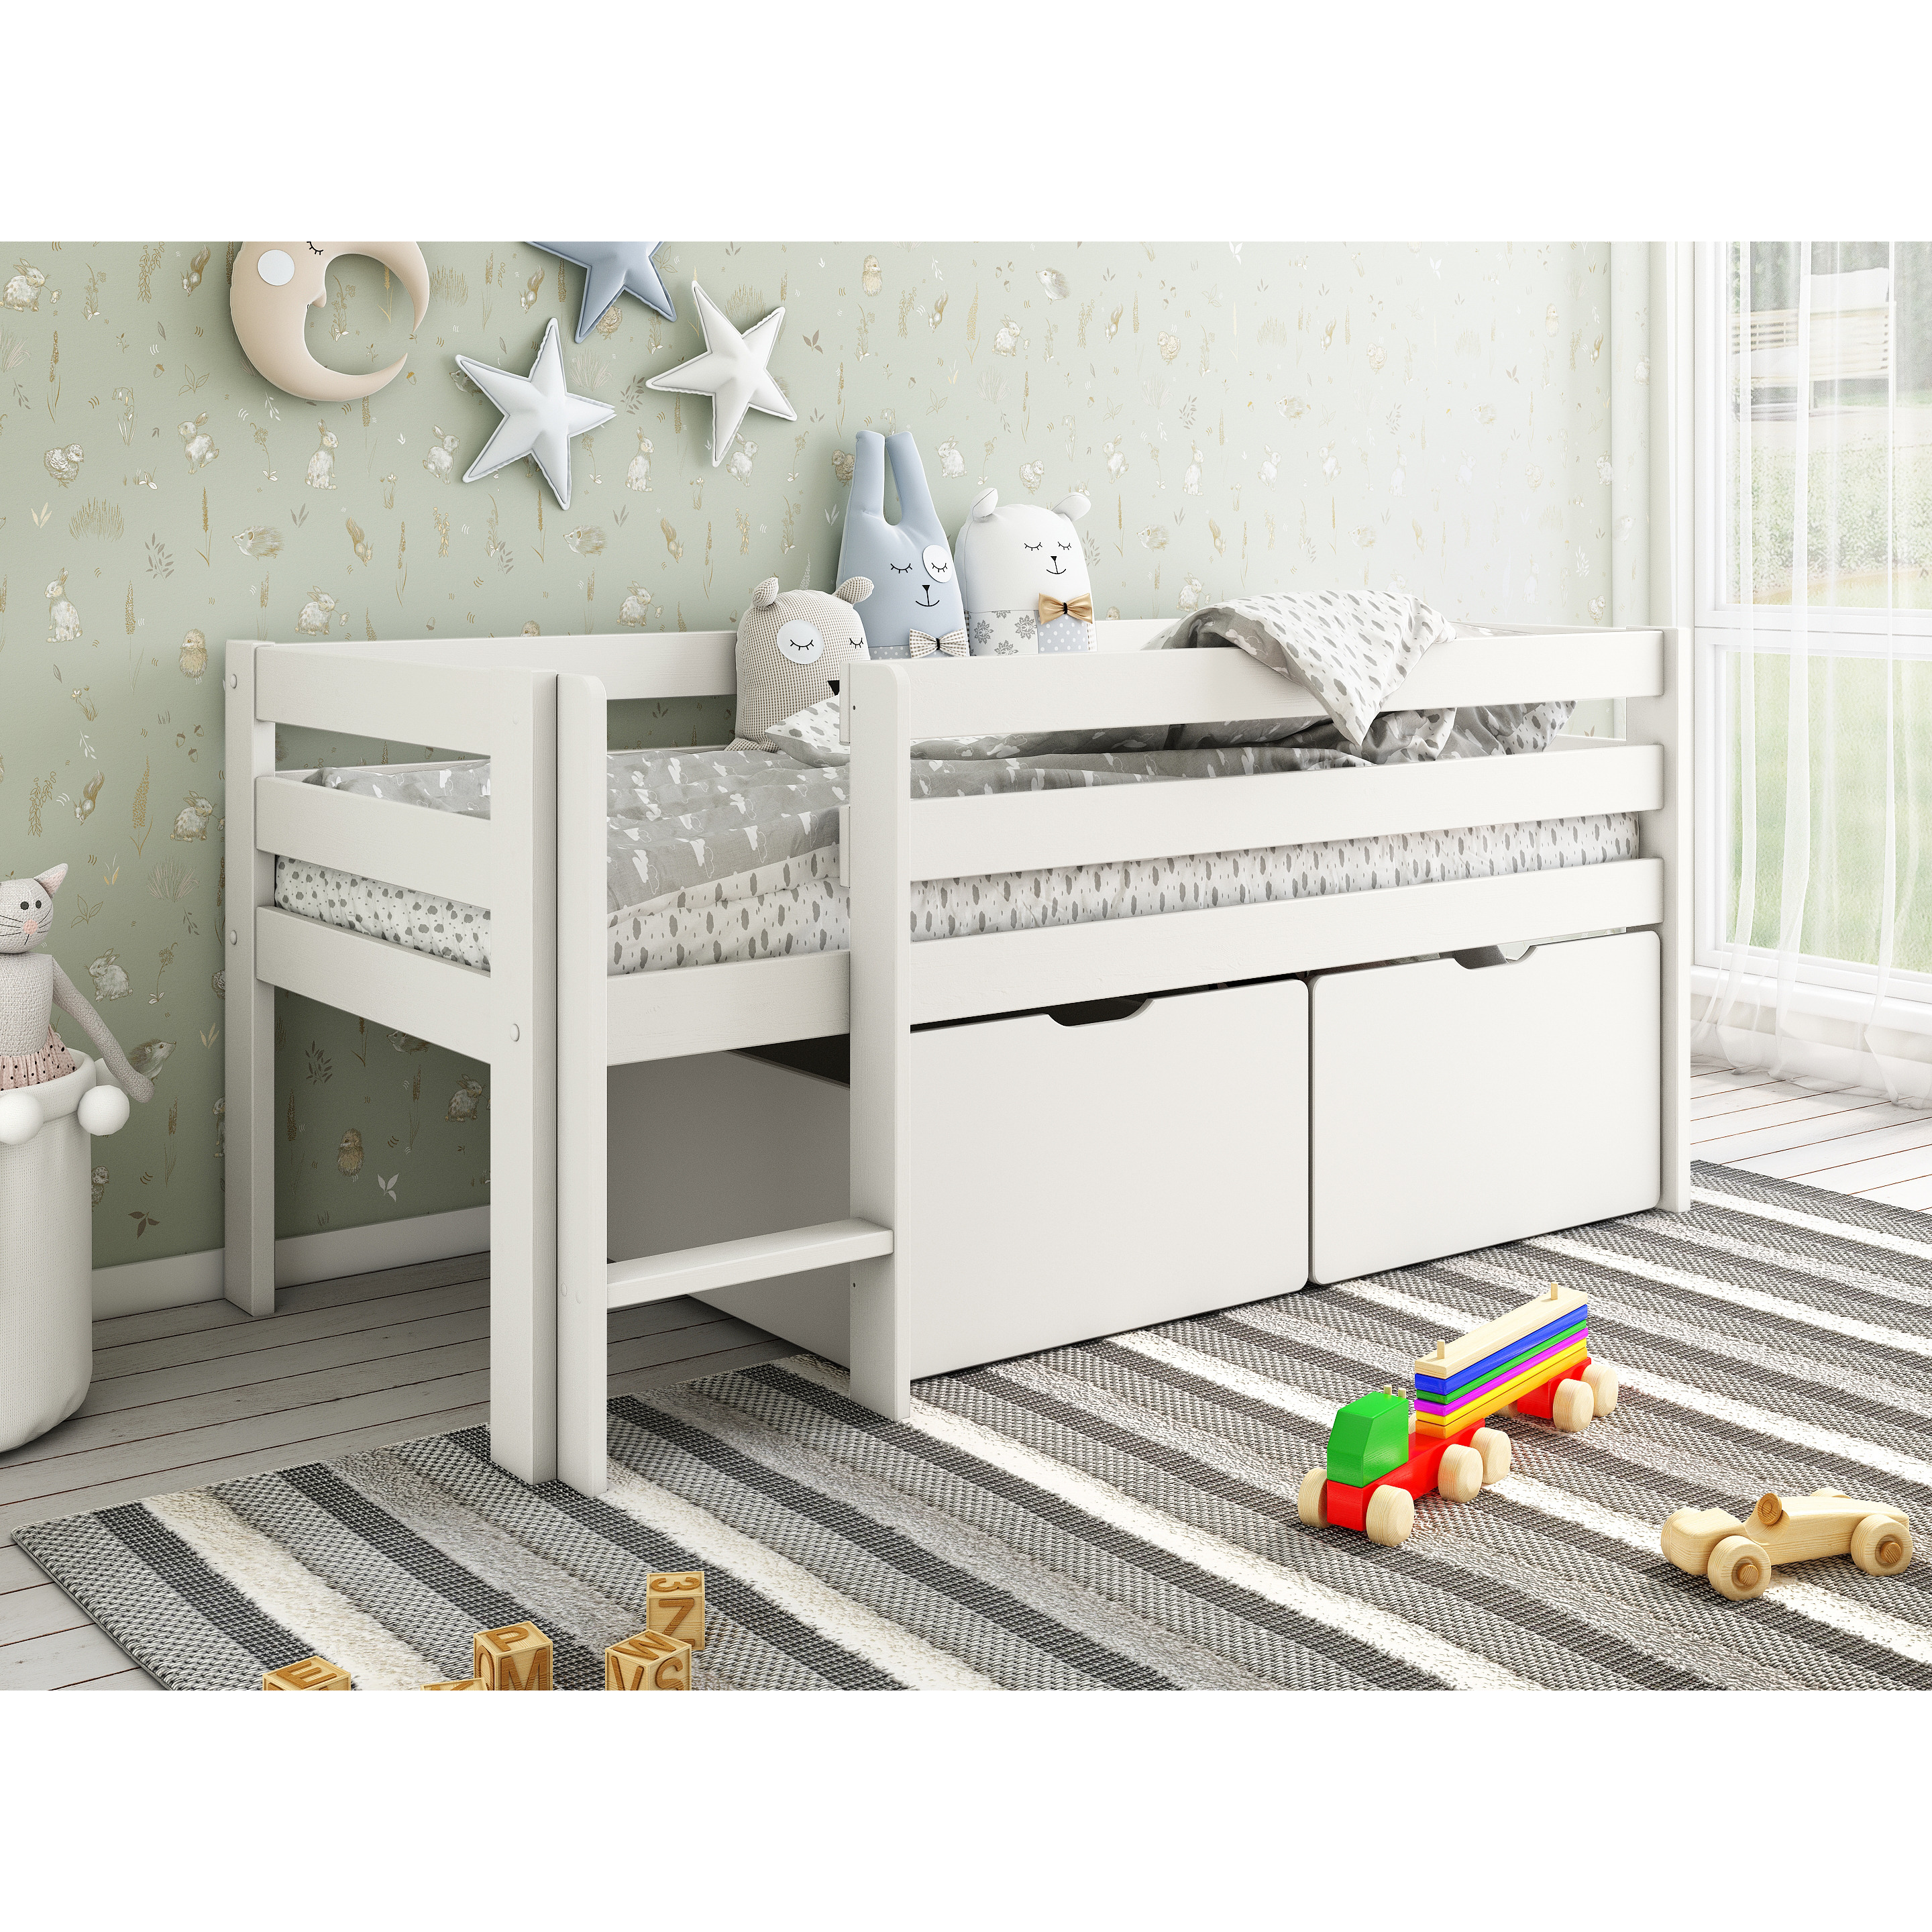 Noomi Shorty Midsleeper With Crate Drawer Set (FSC-Certified) White